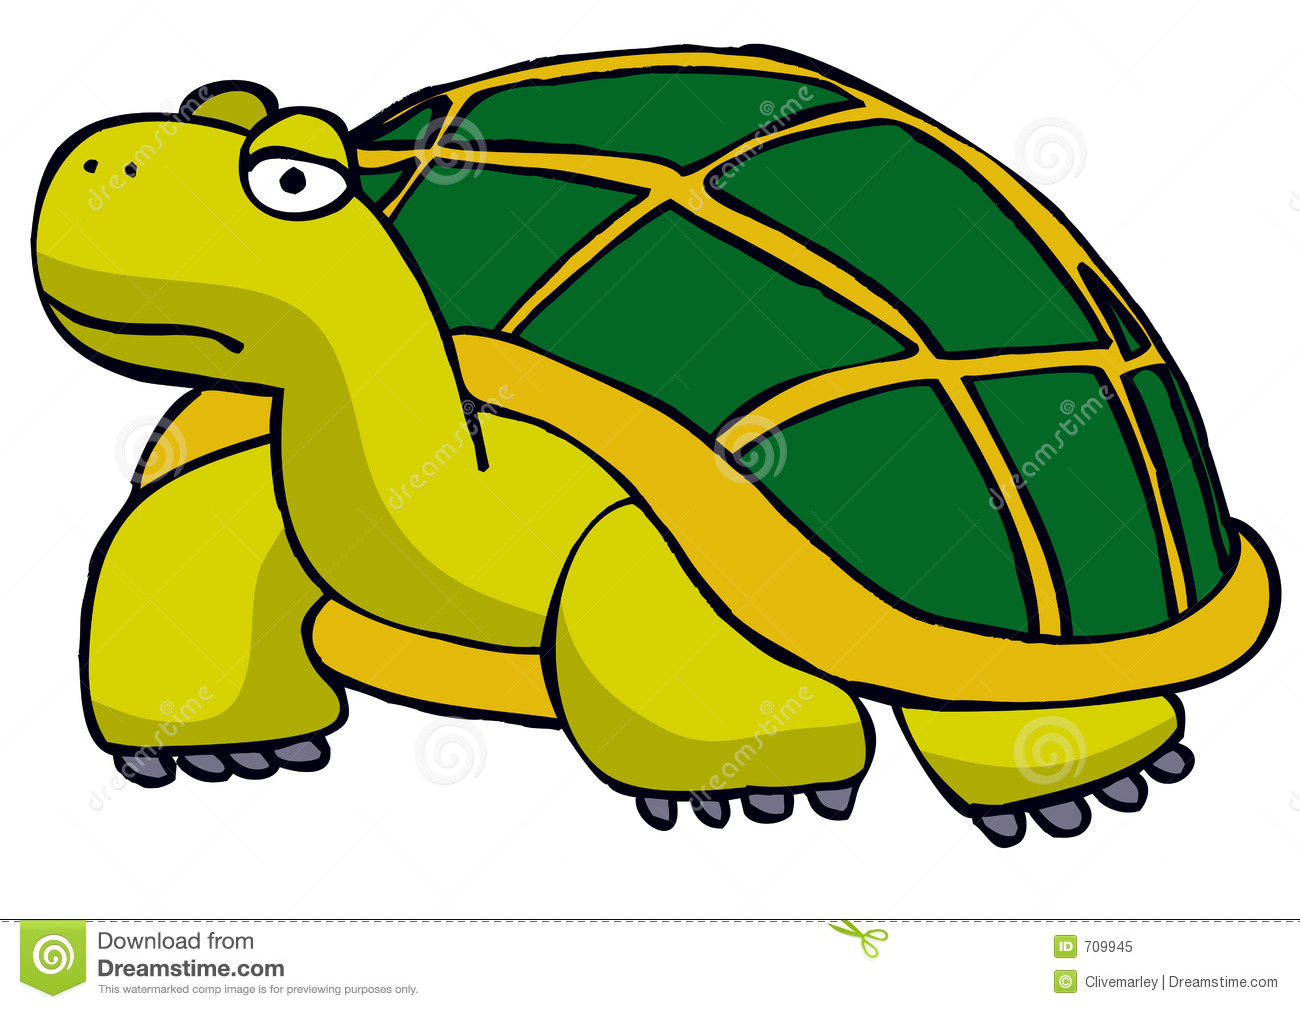 Tortoise clipart #8, Download drawings